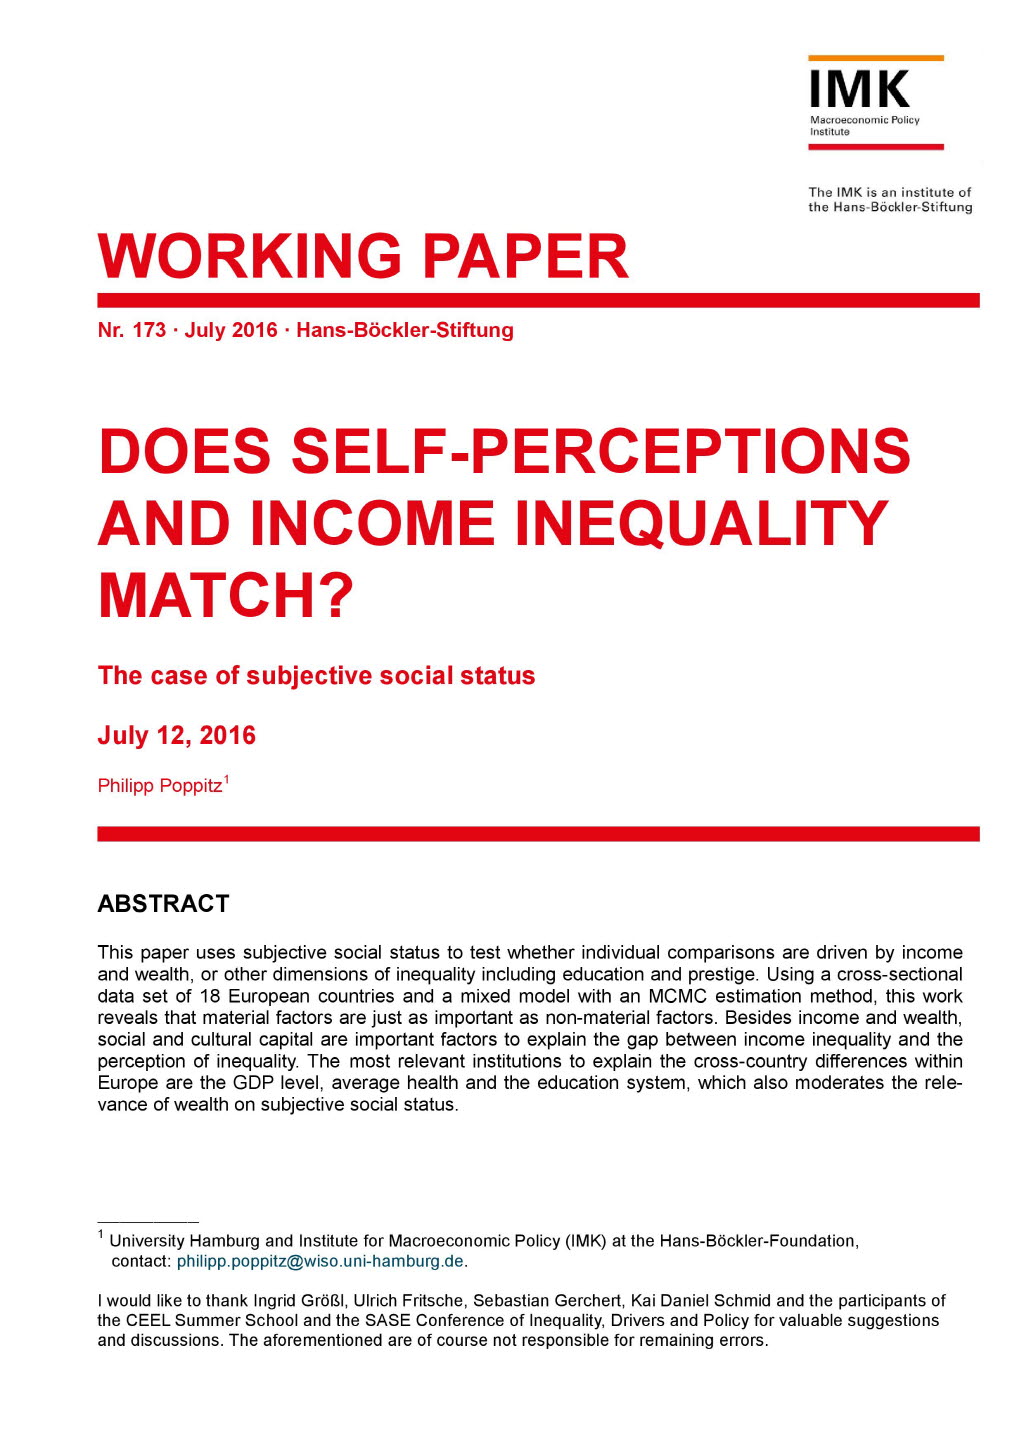 Does self-perceptions and income inequality match?